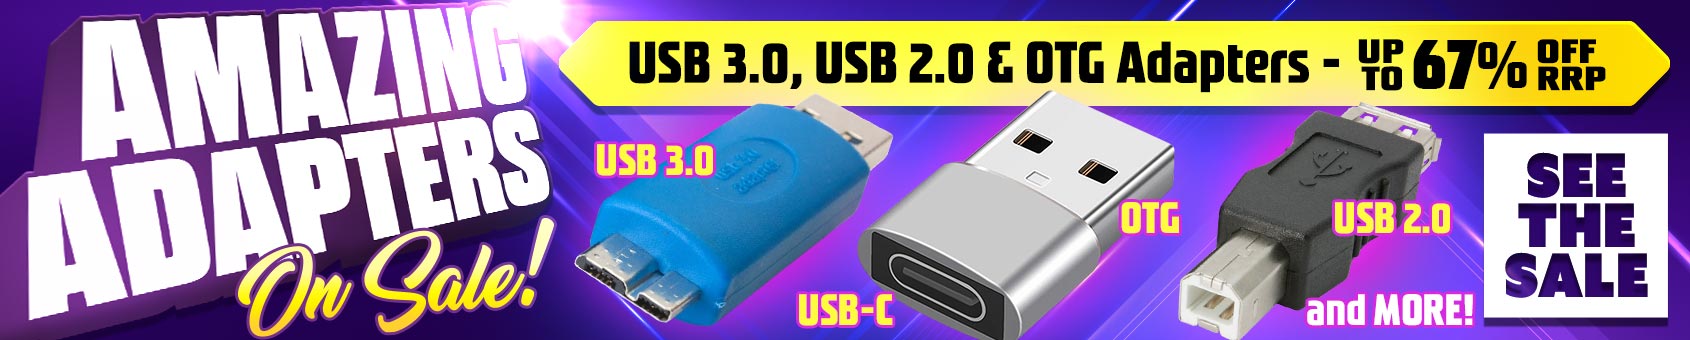 Our BIGGEST SALE EVER on Analogue ALL USB ADAPTERS during April!!!